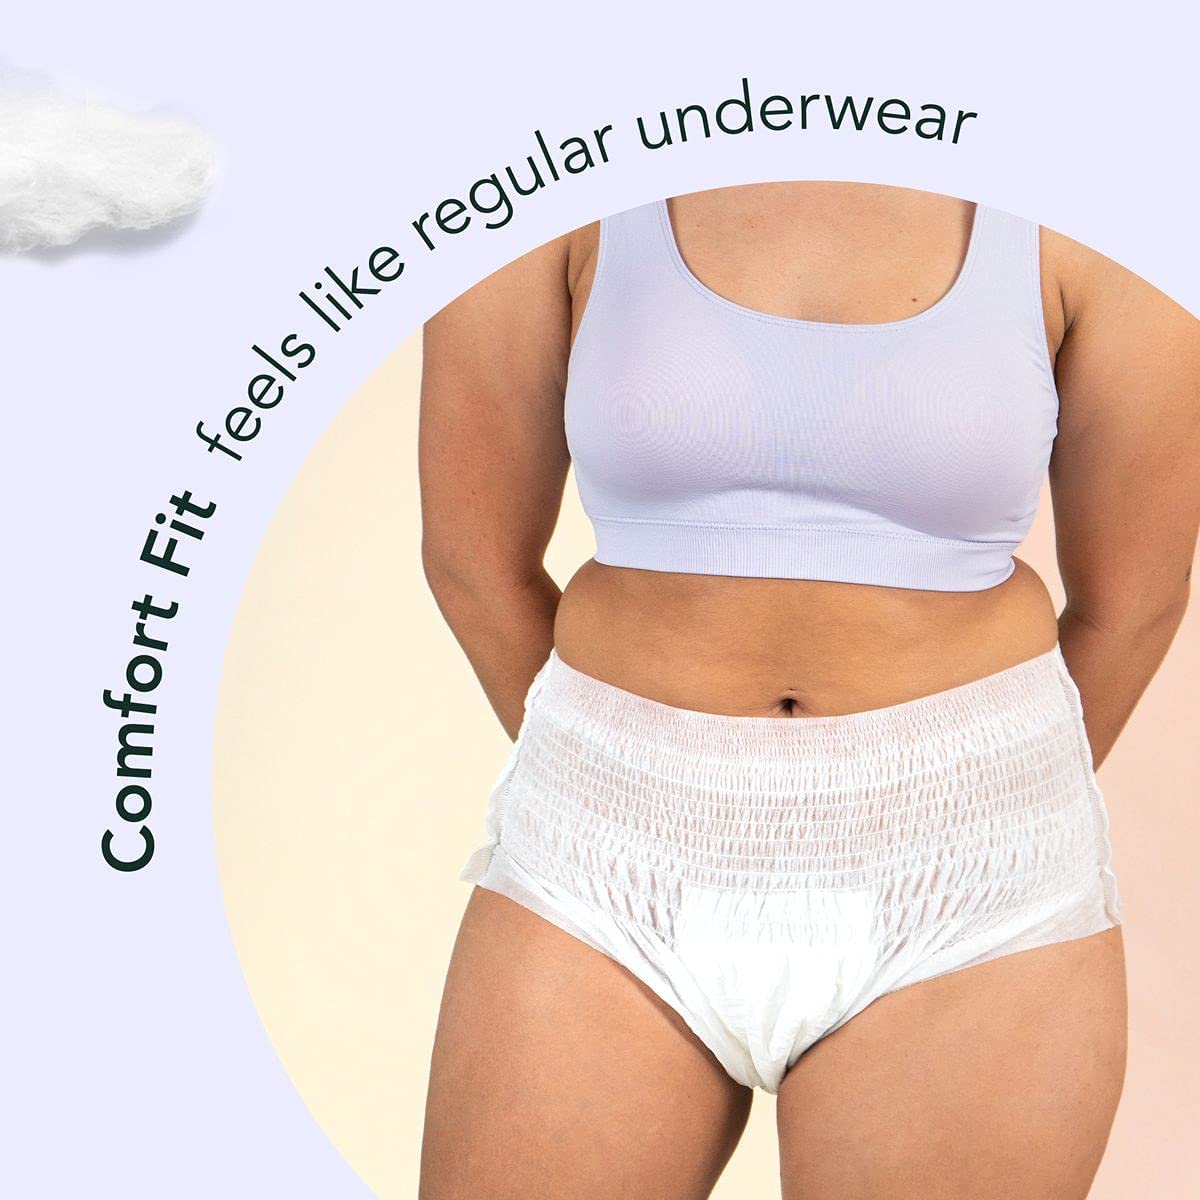 What Are the Benefits of Wearing Underwear?, by Nukleus Organic Wear